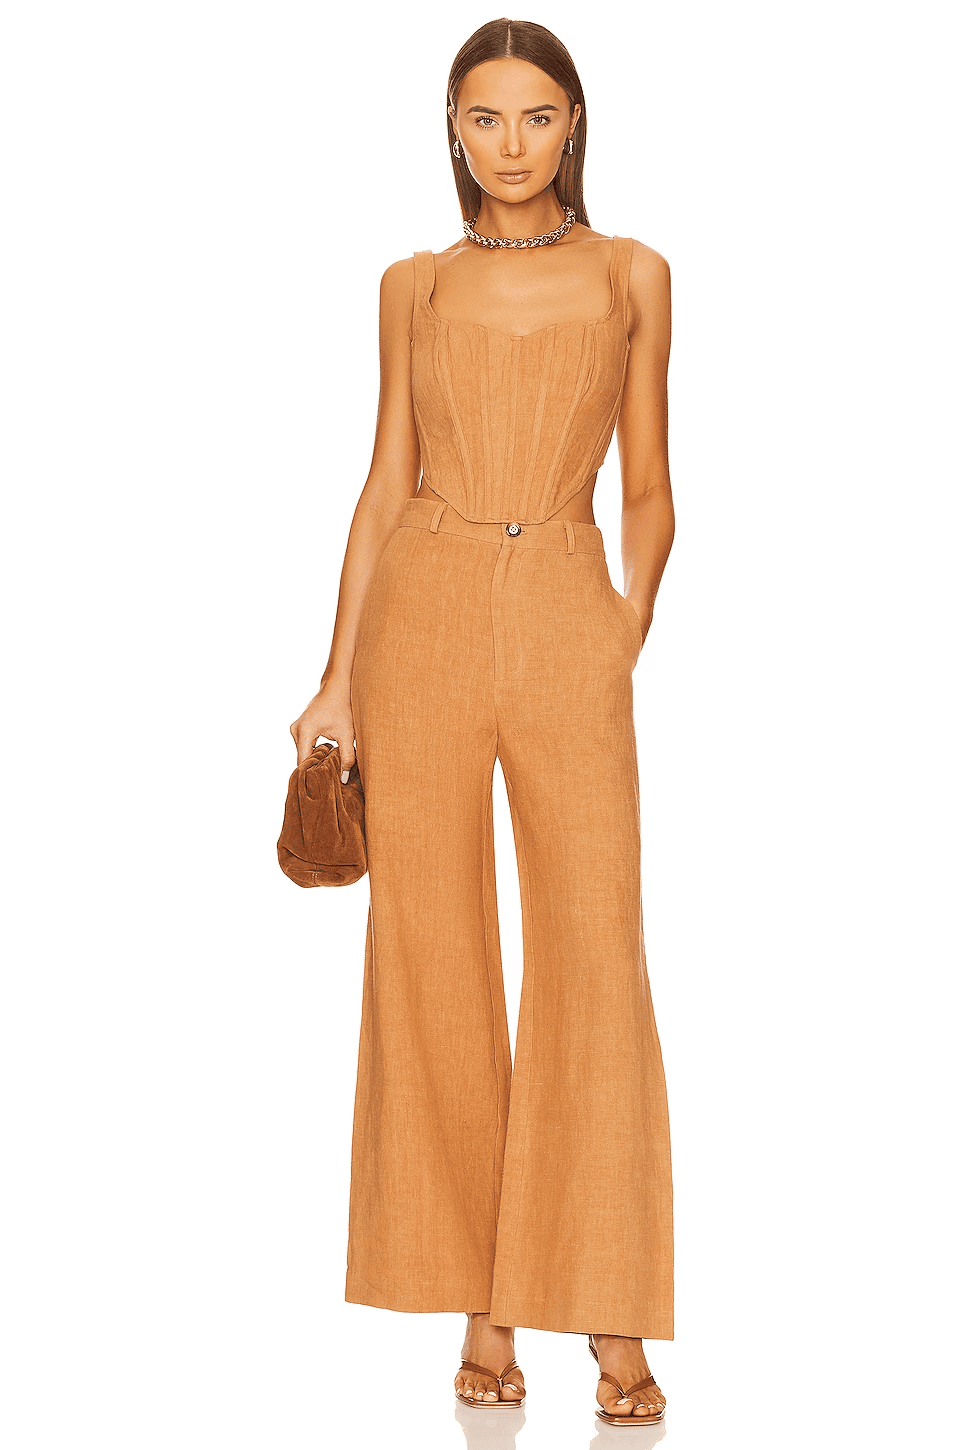 Linen Corset Bustier And Pants In Camel